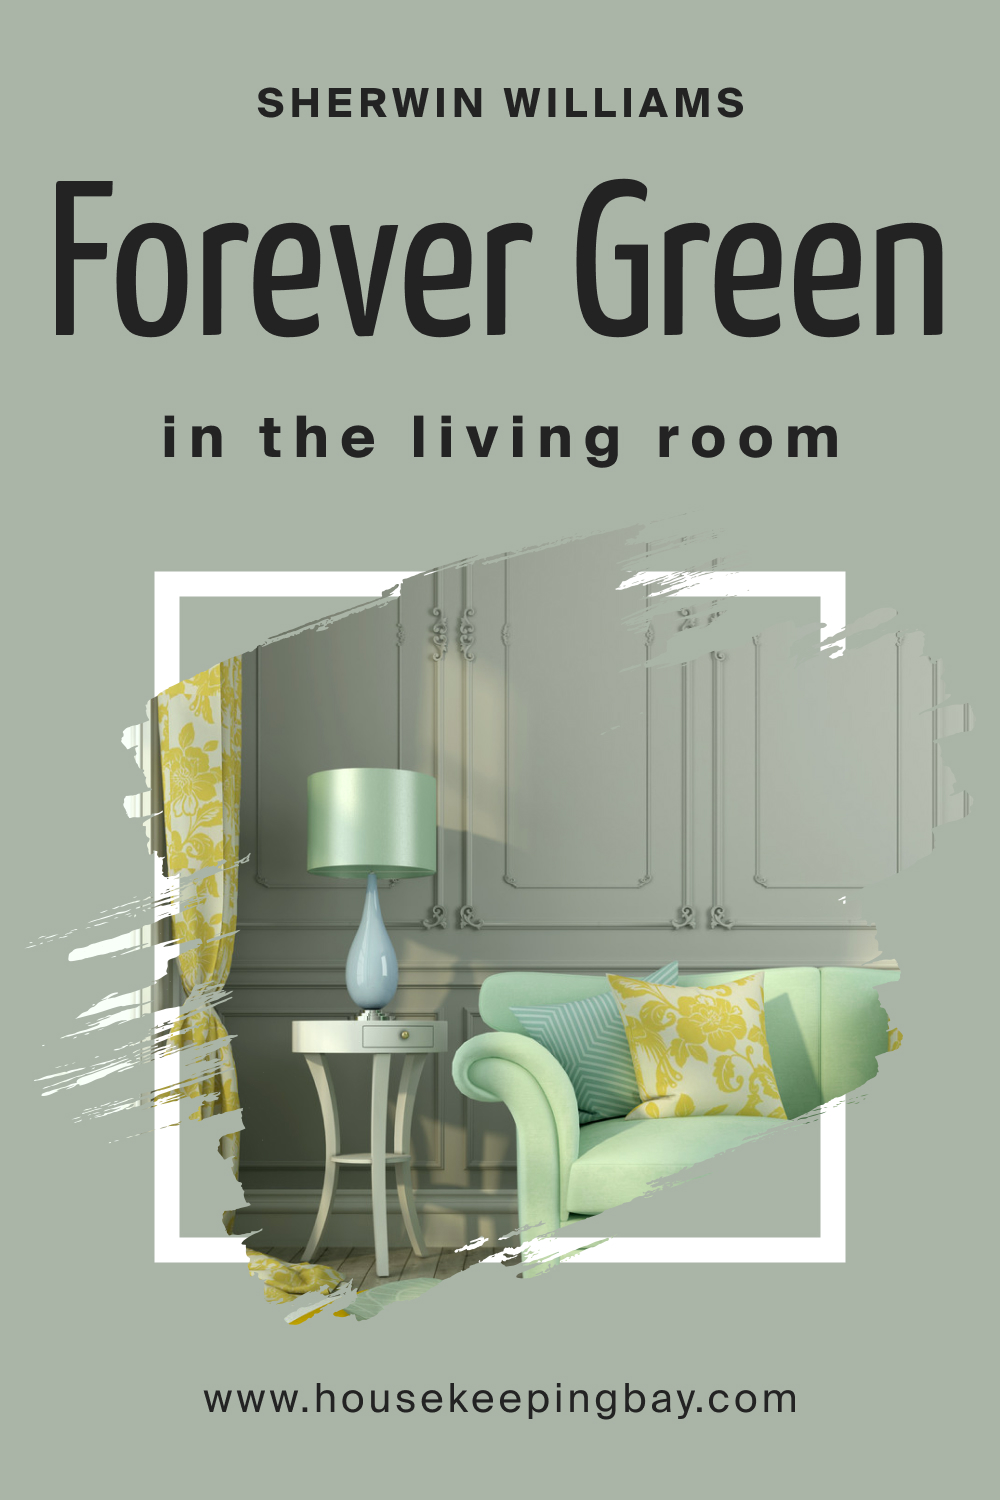 Sherwin Williams. SW 9653 Forever Green In the Living Room